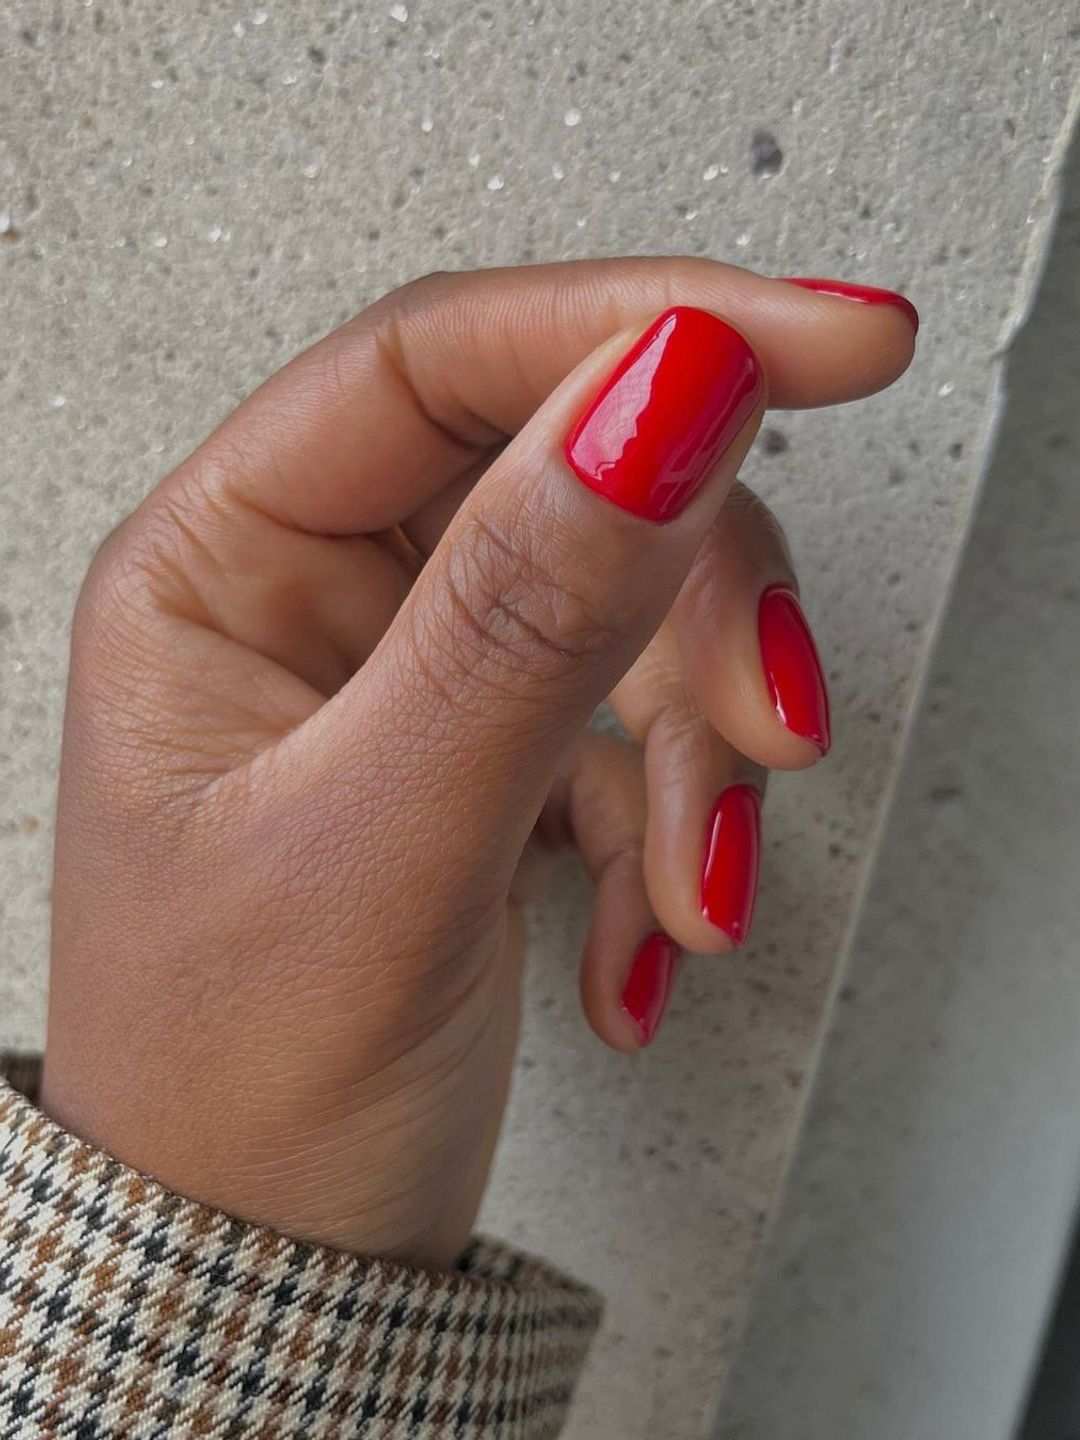 Red nails 